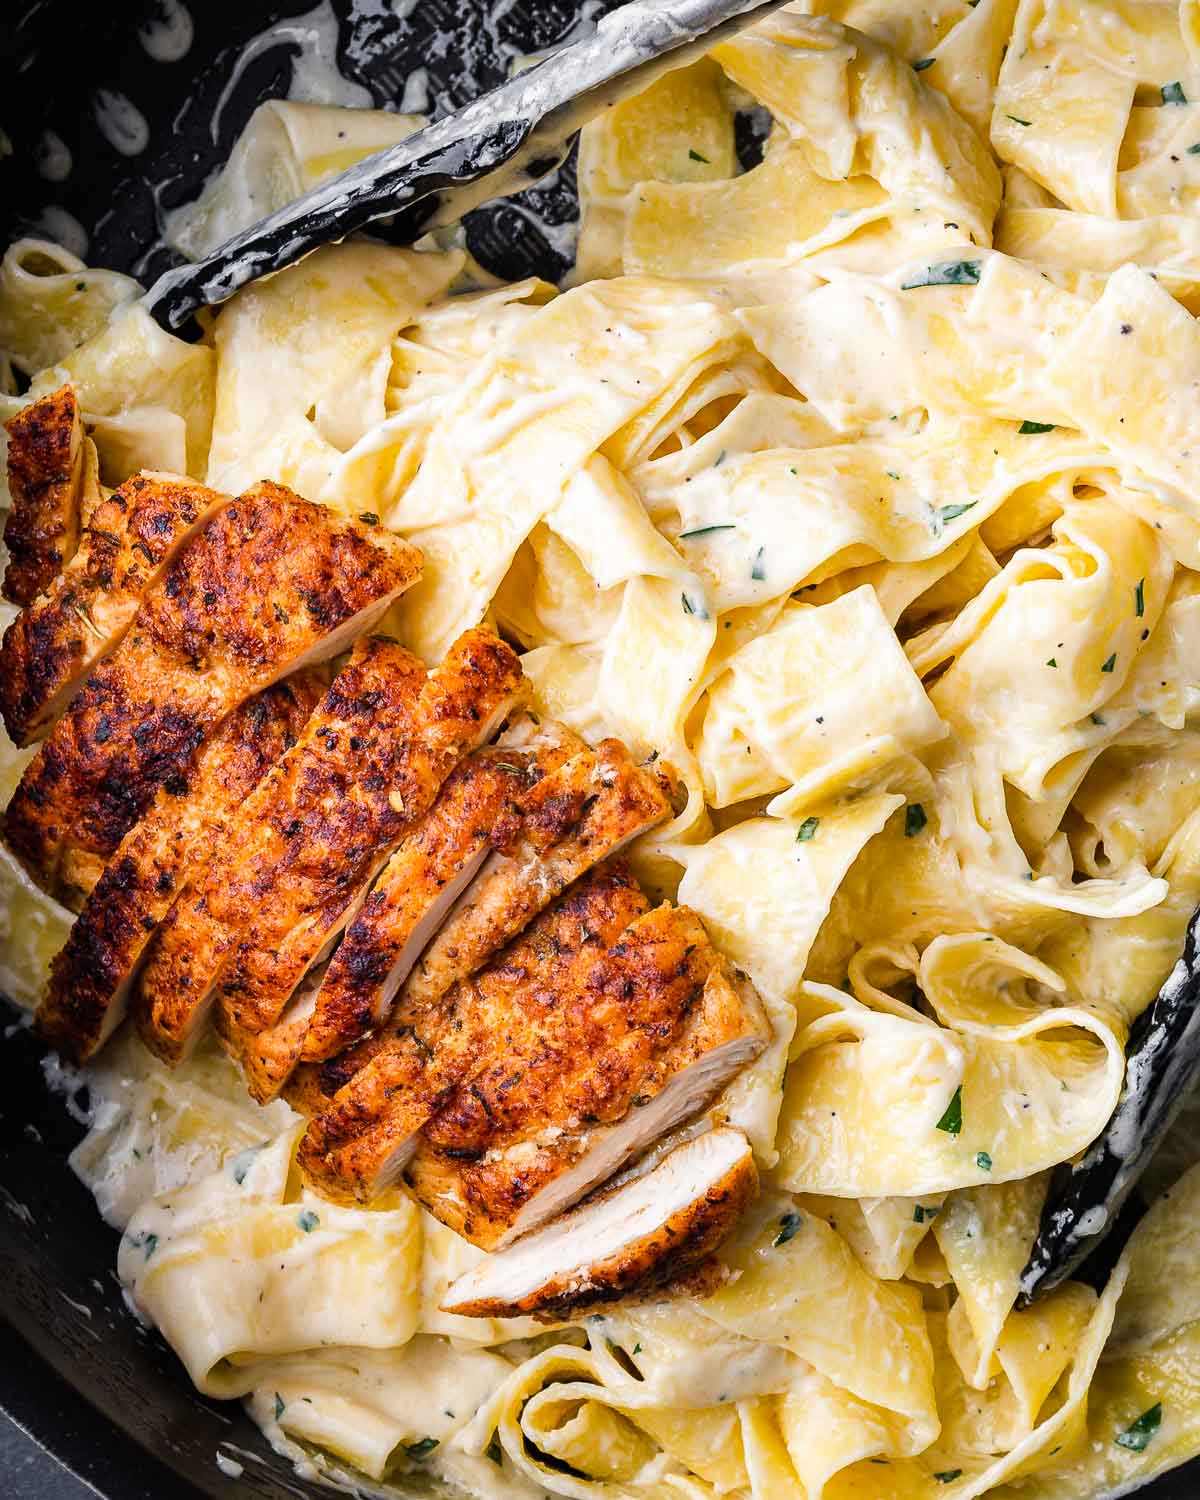 Chicken alfredo pasta in black pan with tongs.